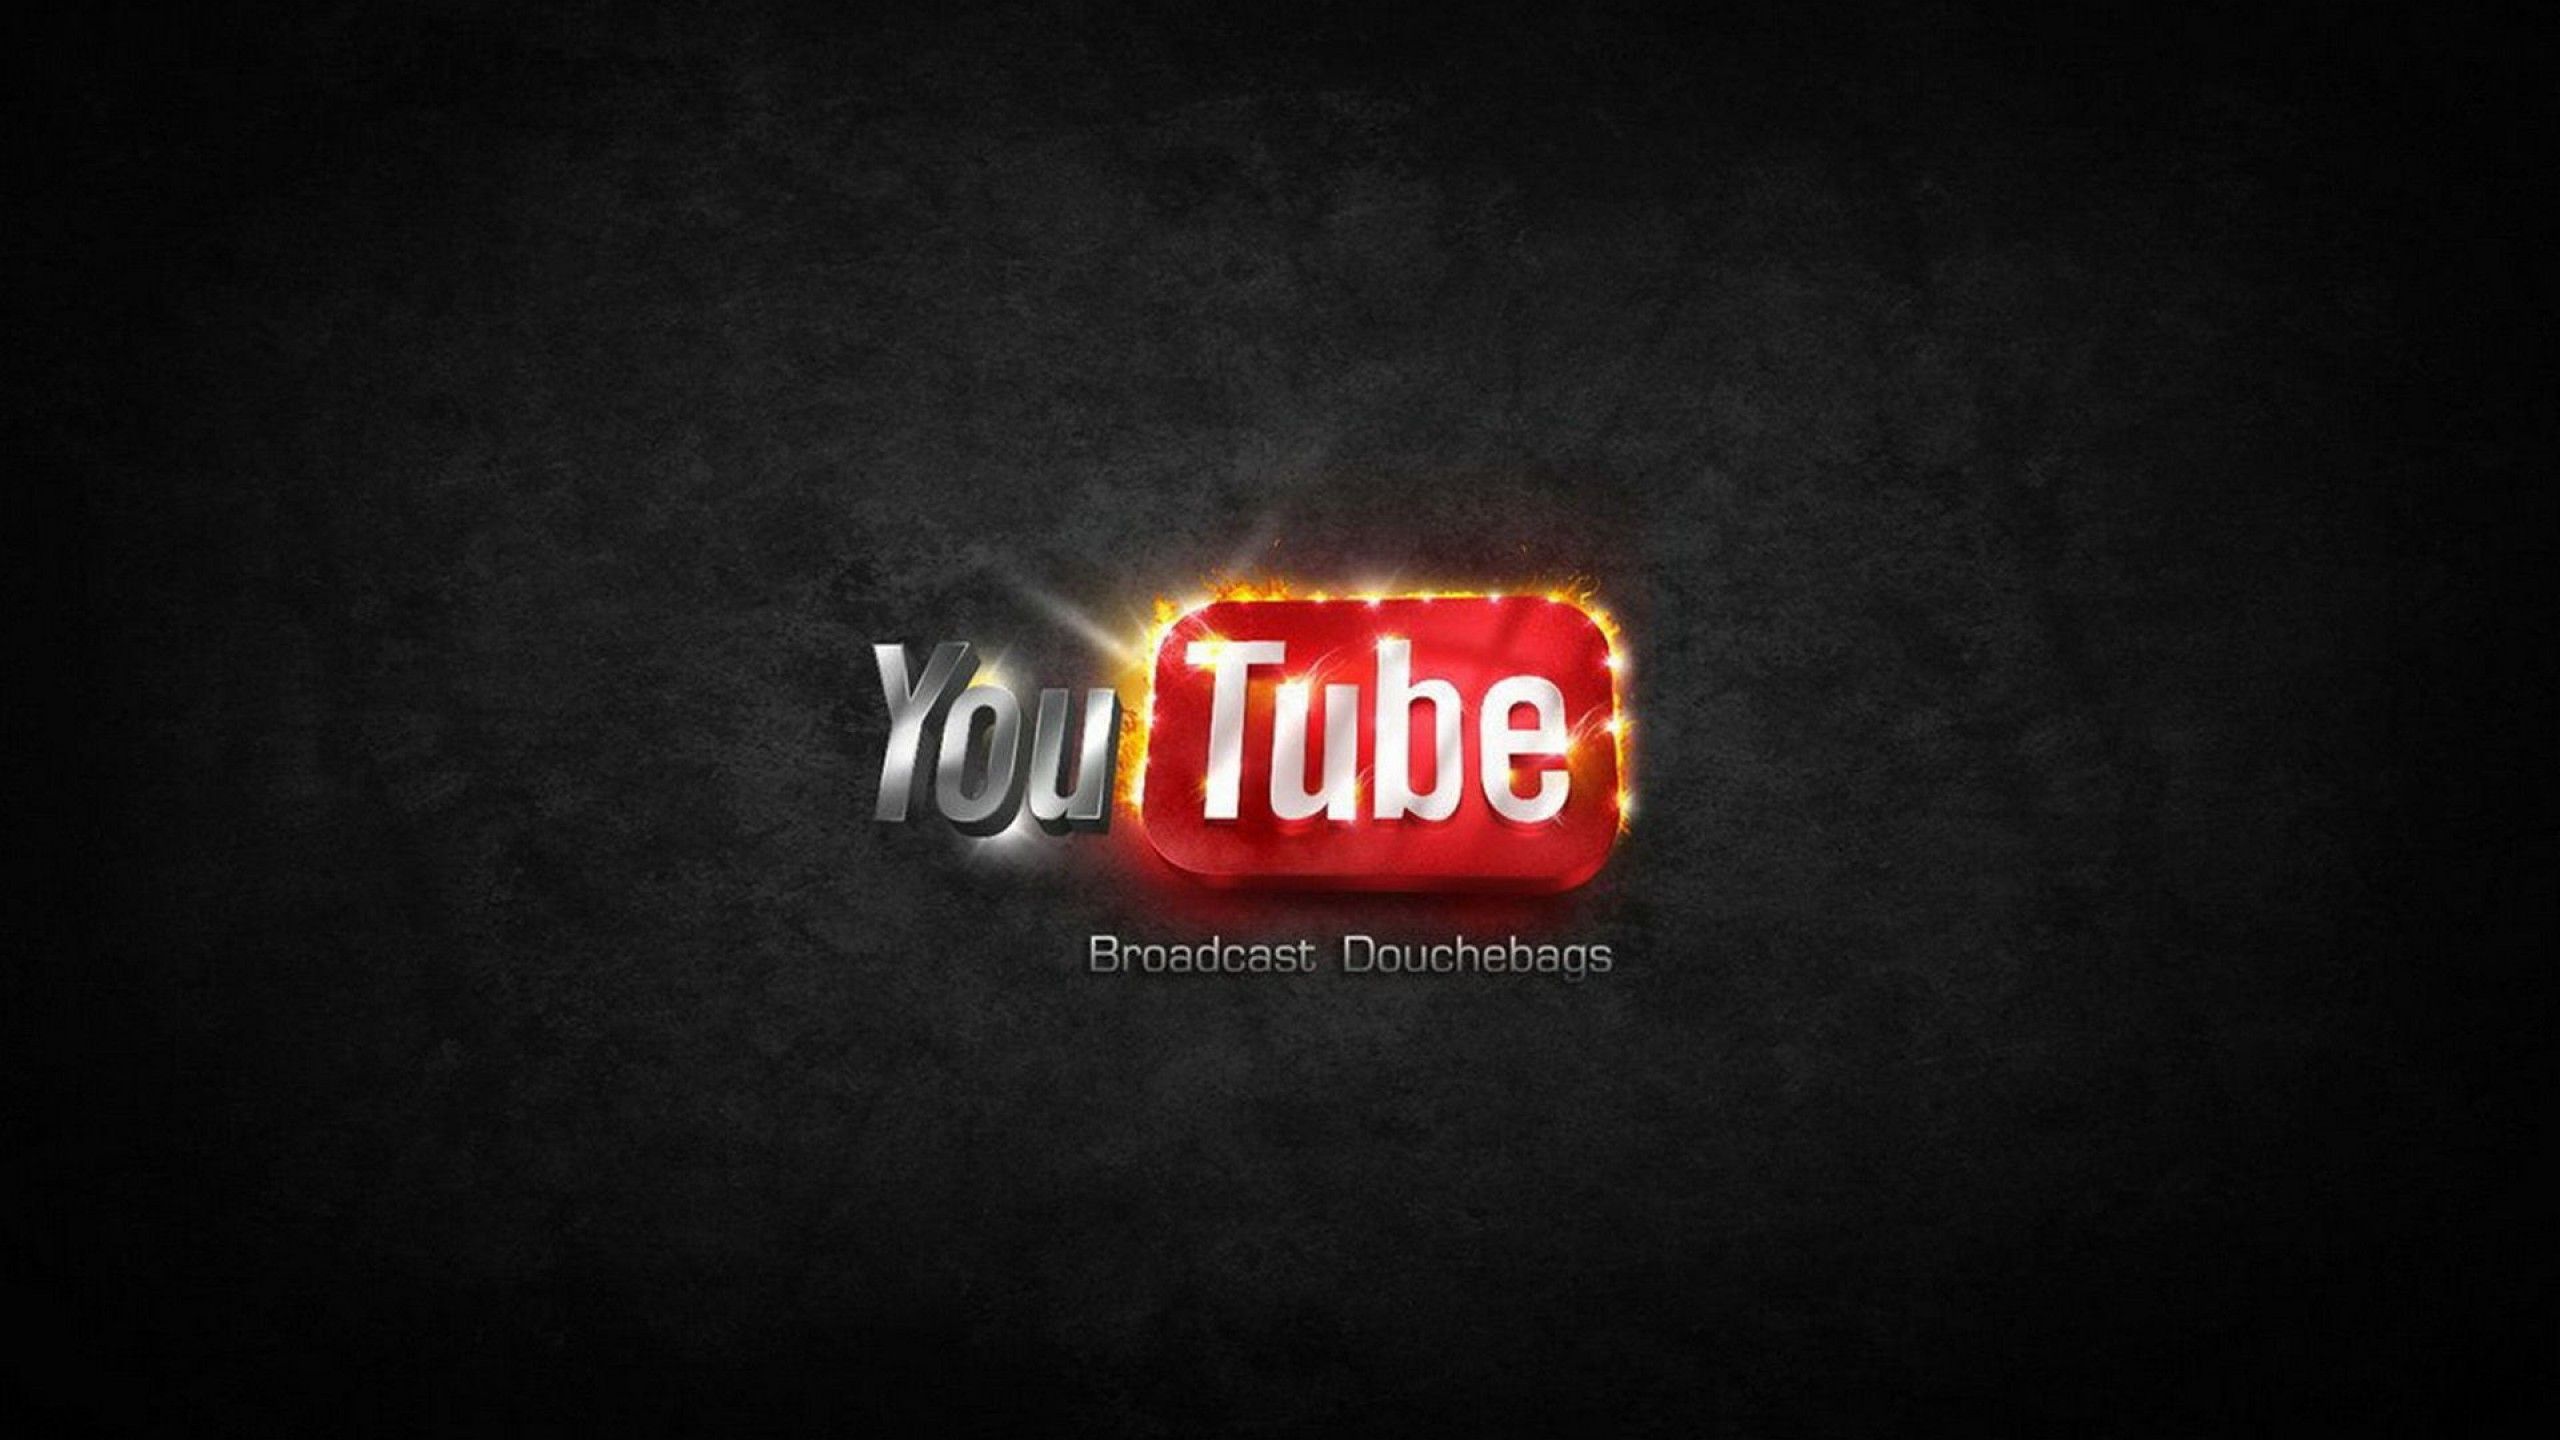 Gaming Wallpaper for YouTube Channel 879×1024 YouTube Gaming Background (40 Wallpaper). Adorable Wallpaper. Gaming wallpaper, Youtube logo, Youtube names